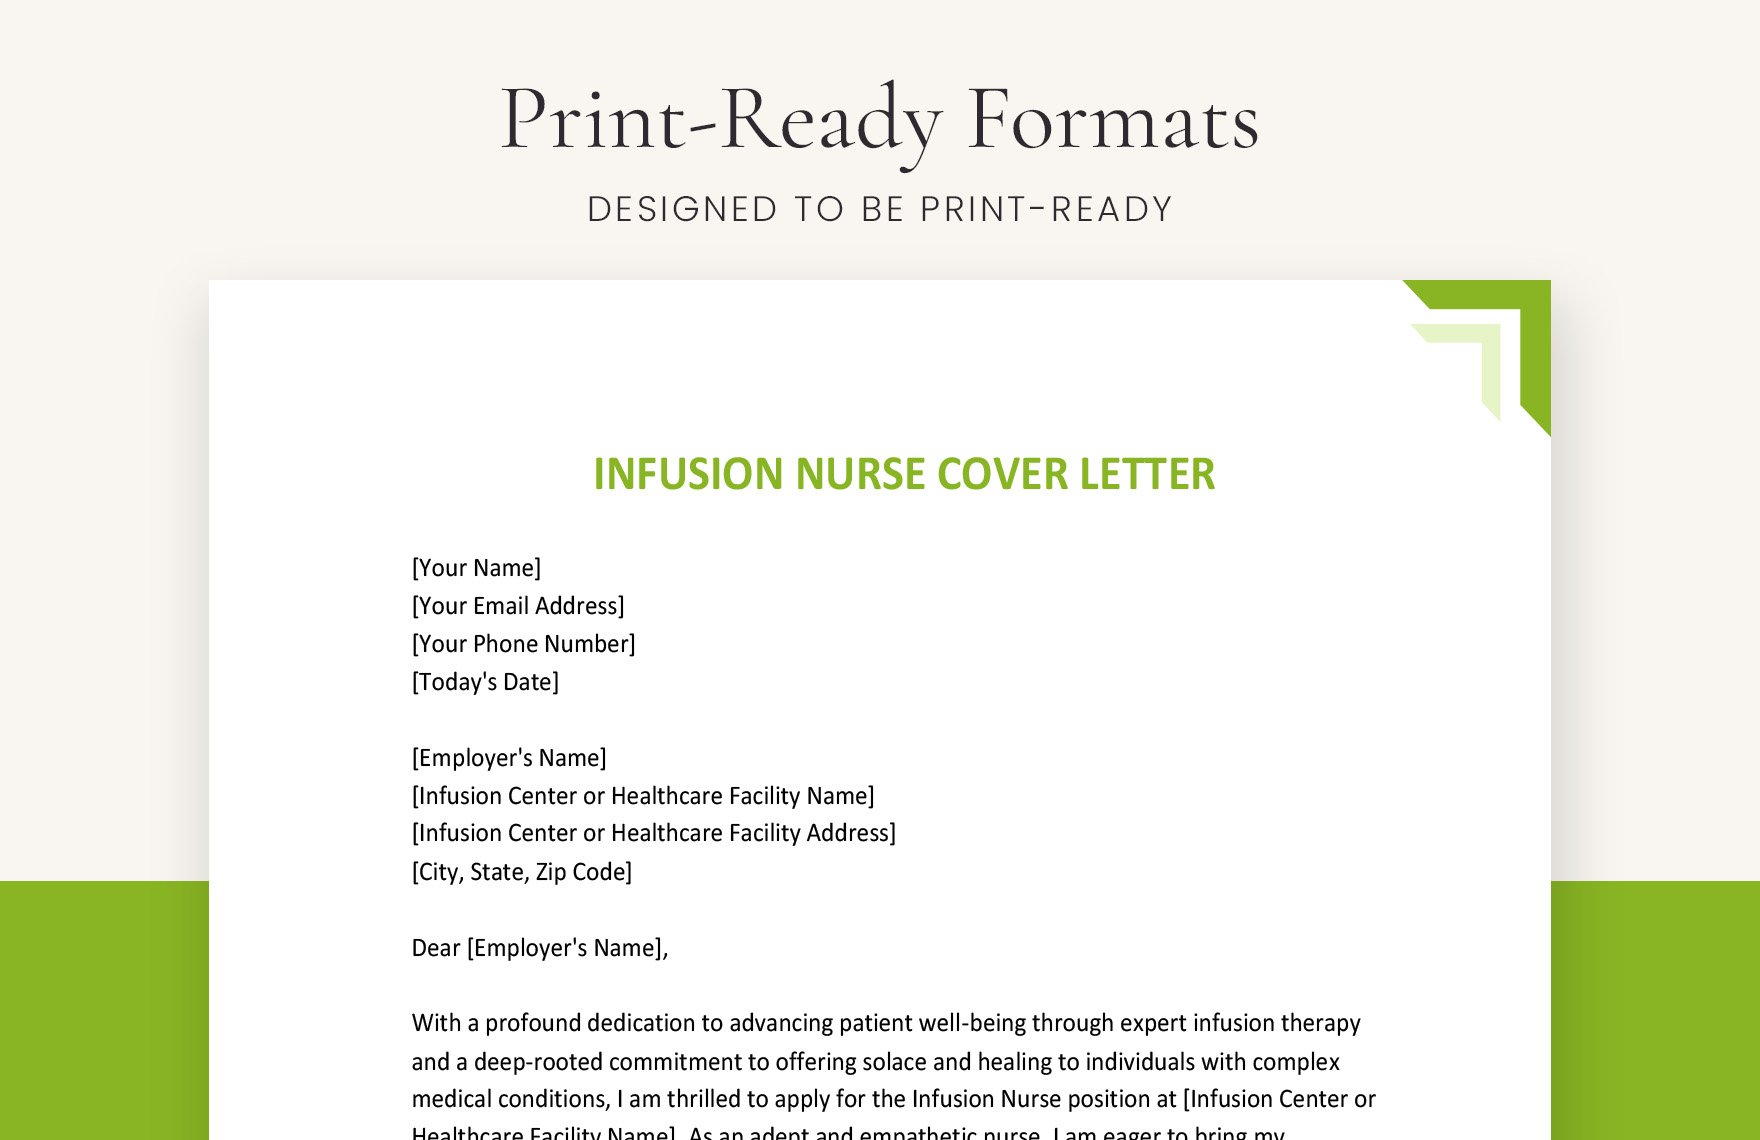 Infusion Nurse Cover Letter